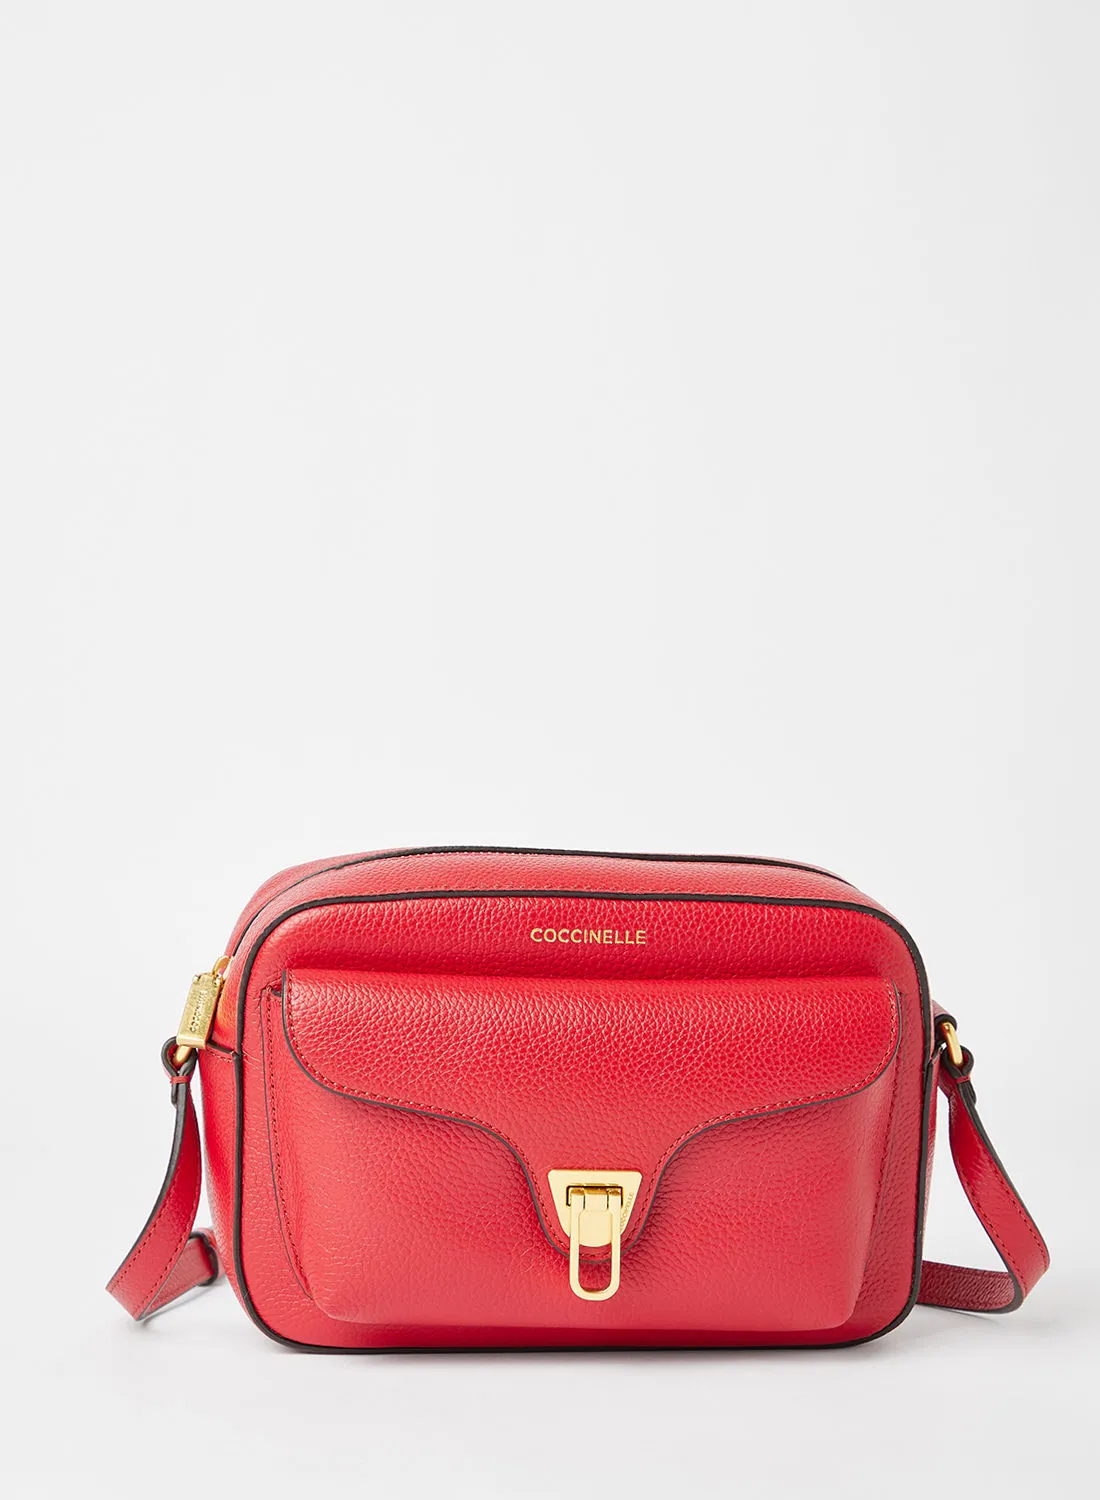 COCCINELLE Leather Crossbody Bag Red